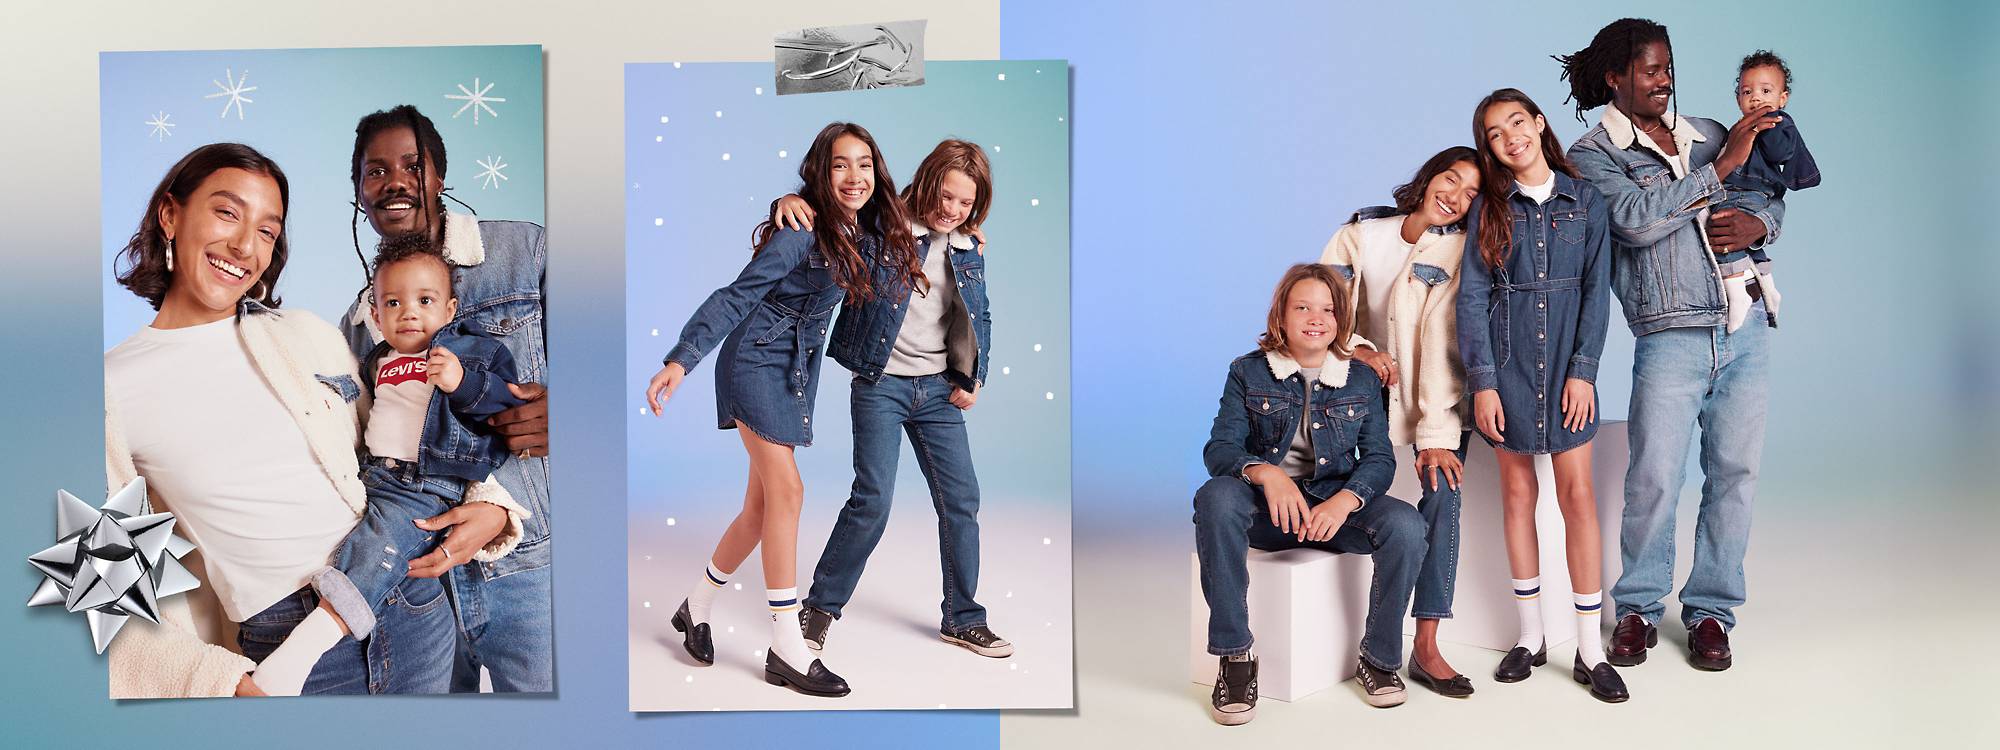 Blue toned background with image collage of models in assorted denim styles